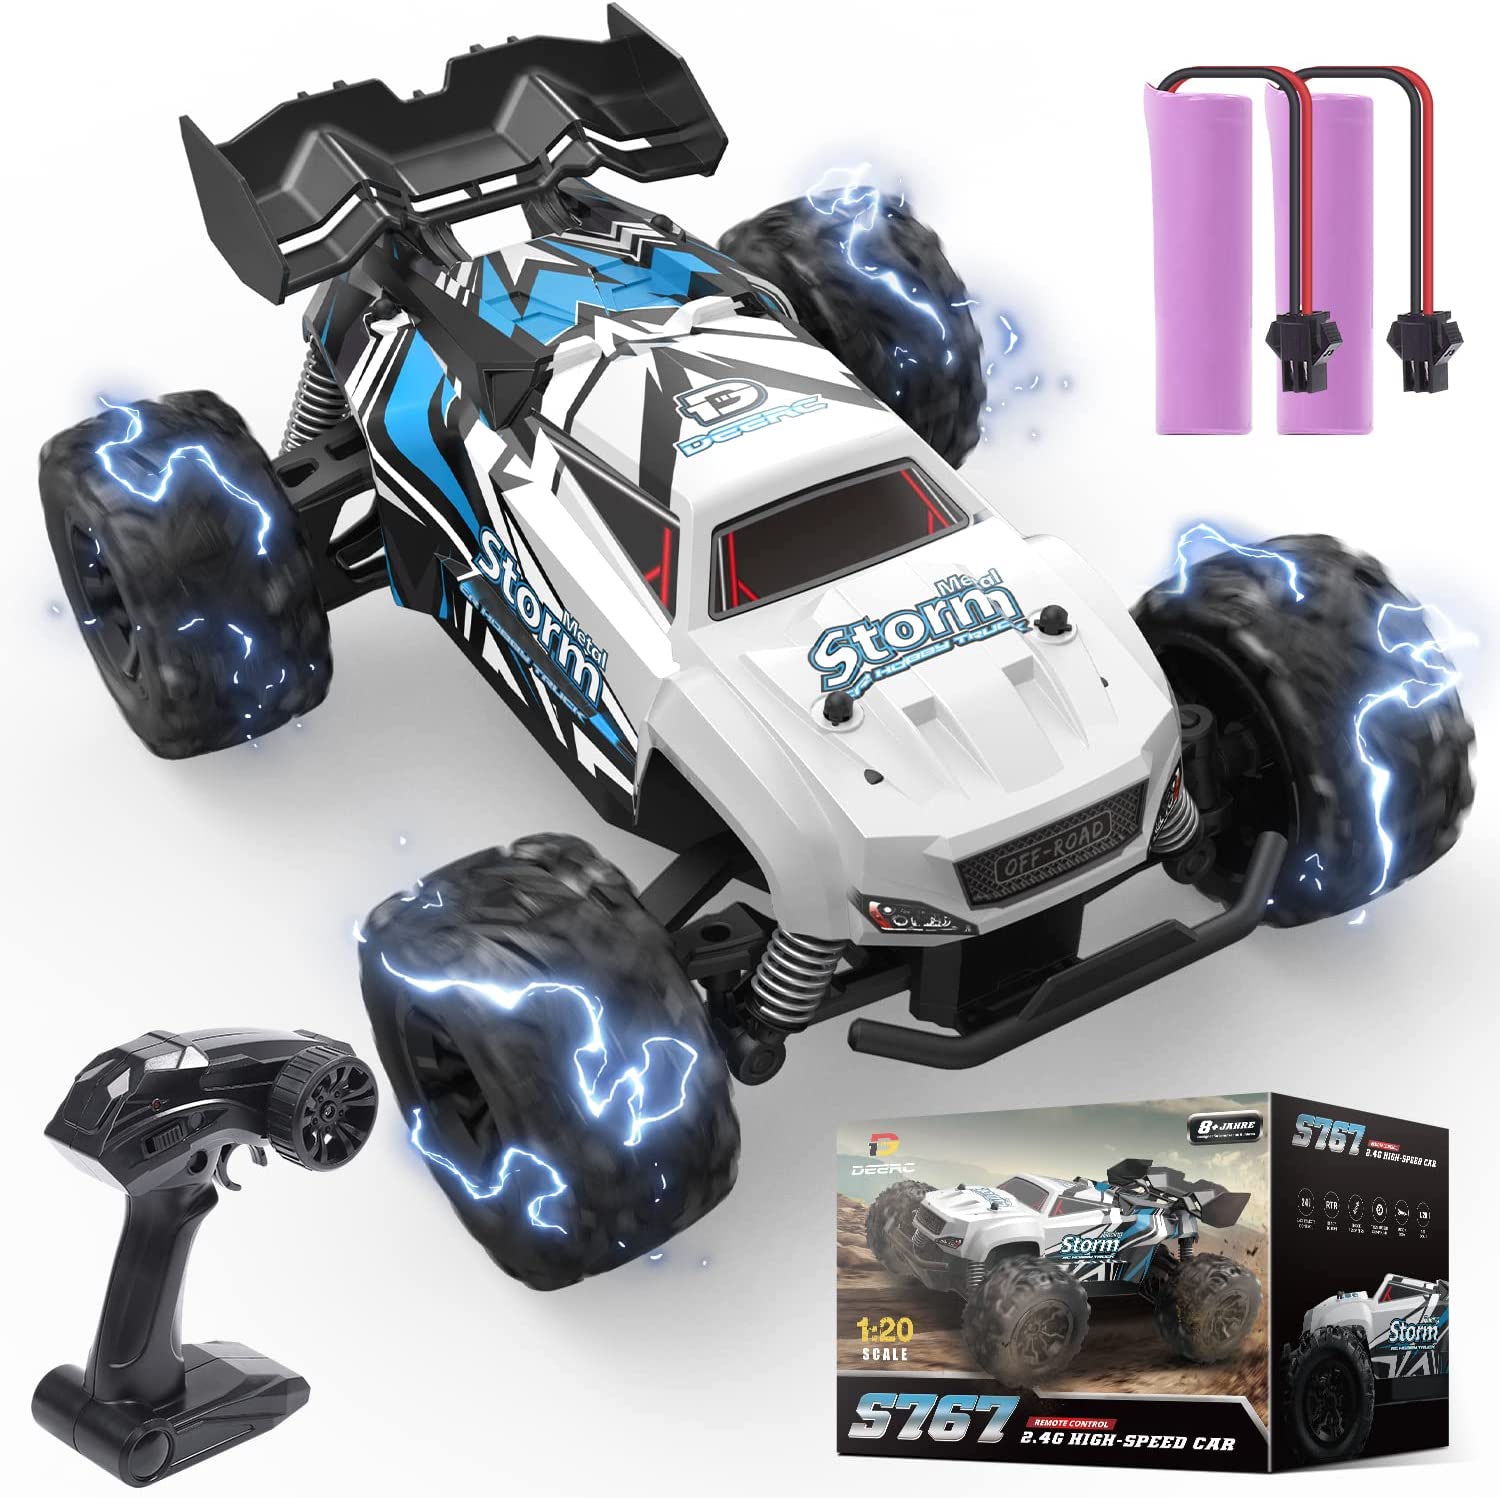 DEERC RC Car, Remote Control Monster Truck W/ 2 Batteries for 40 Min Play, All-Terrain 2.4GHz RTR Rock Crawler Toy Gift for Boys Girls Kids Beginners